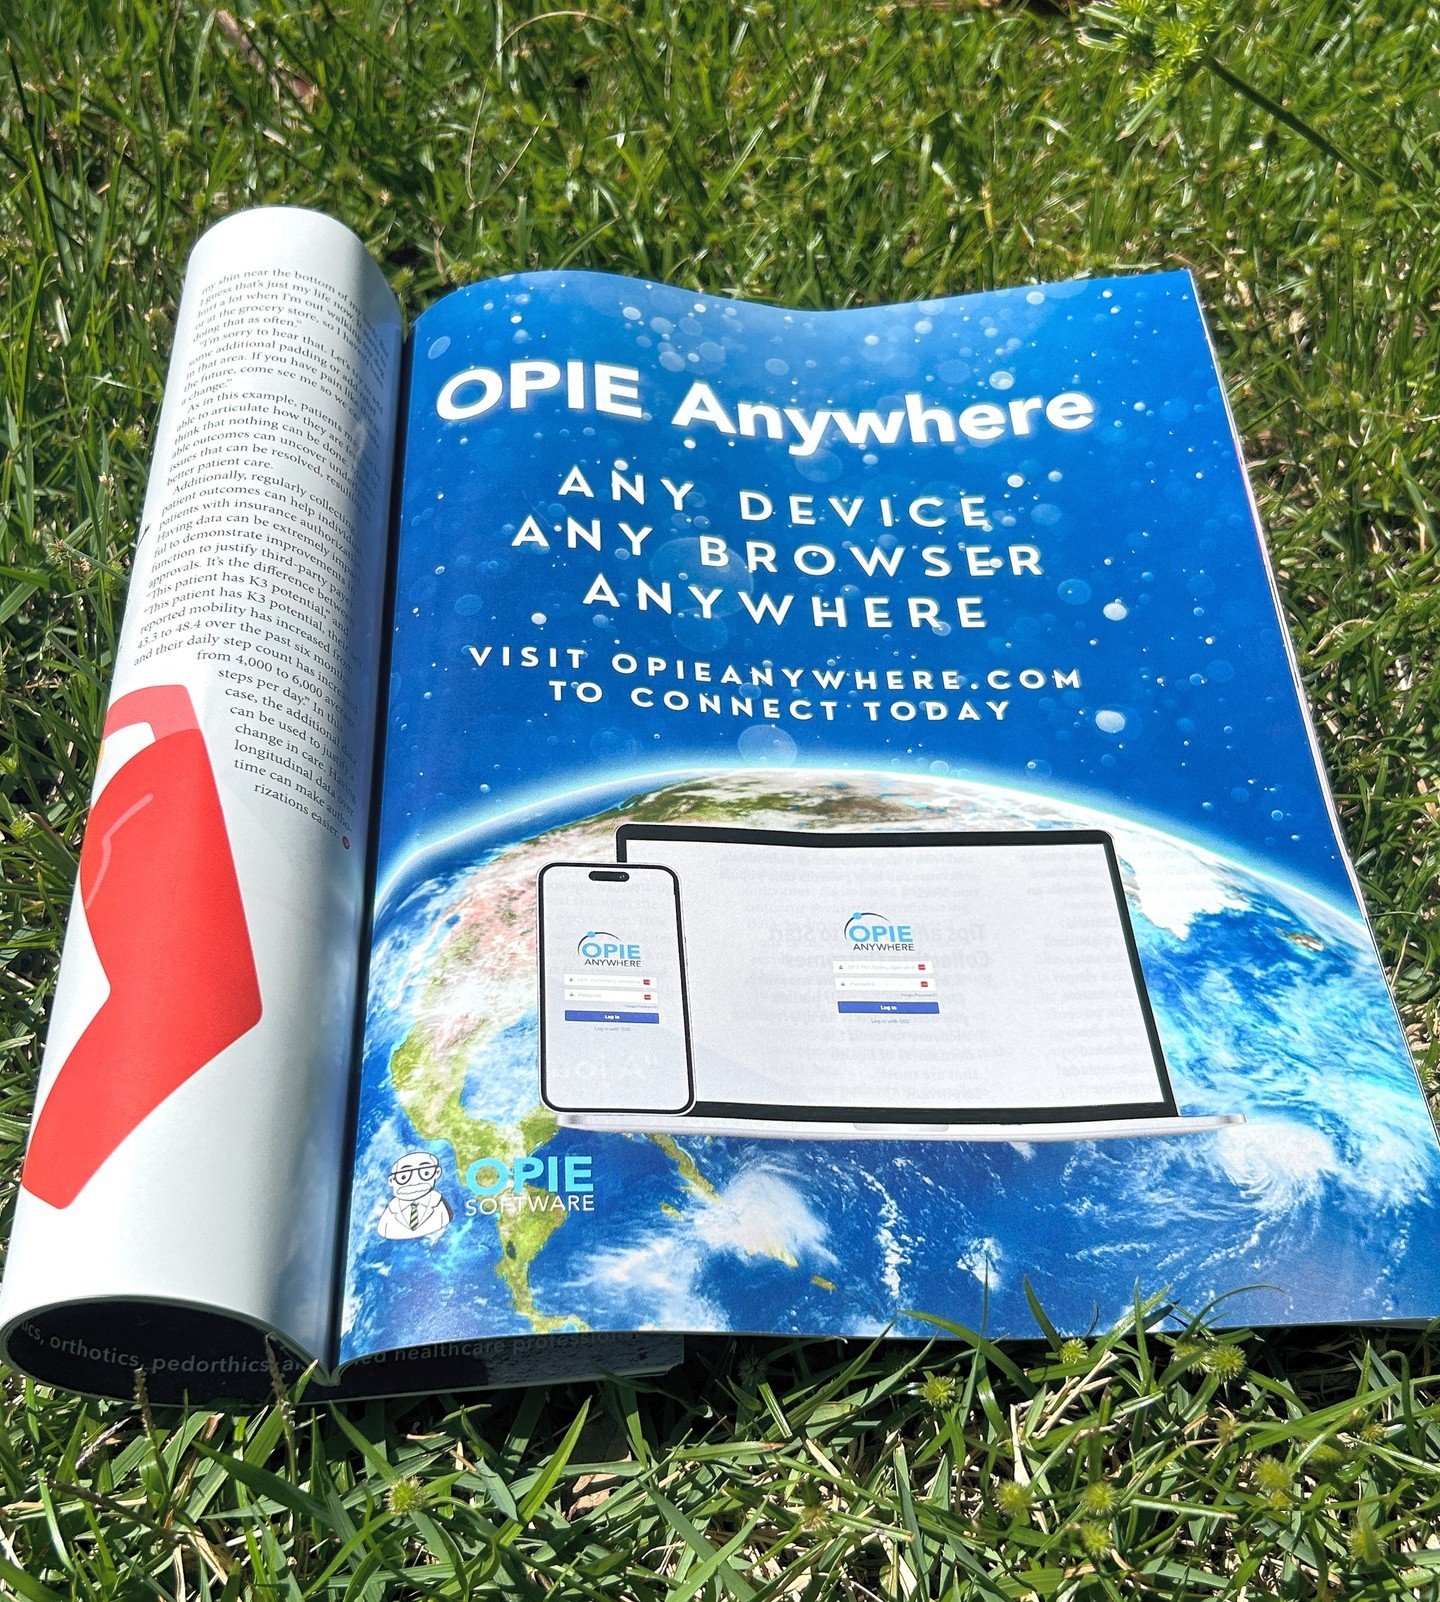 OPIE Here, 
OPIE There, 
OPIE Anywhere!

Have you read the latest issue of the Edge Magazine?
We have lots of exciting updates coming to OA soon so stay tuned!